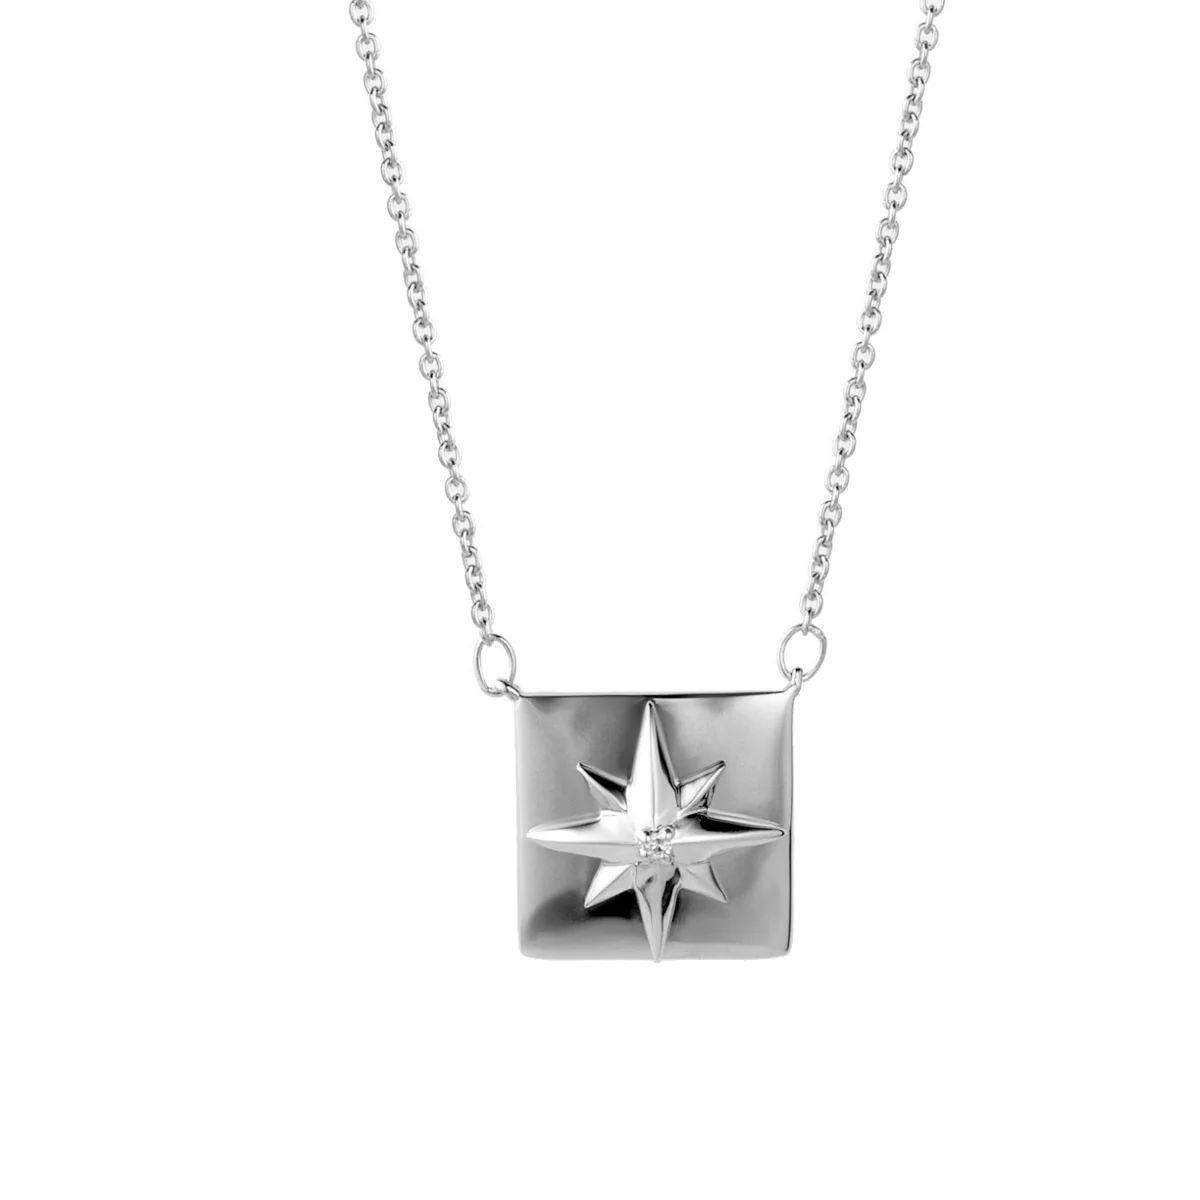 Stationary North Star Necklace | Awe Inspired